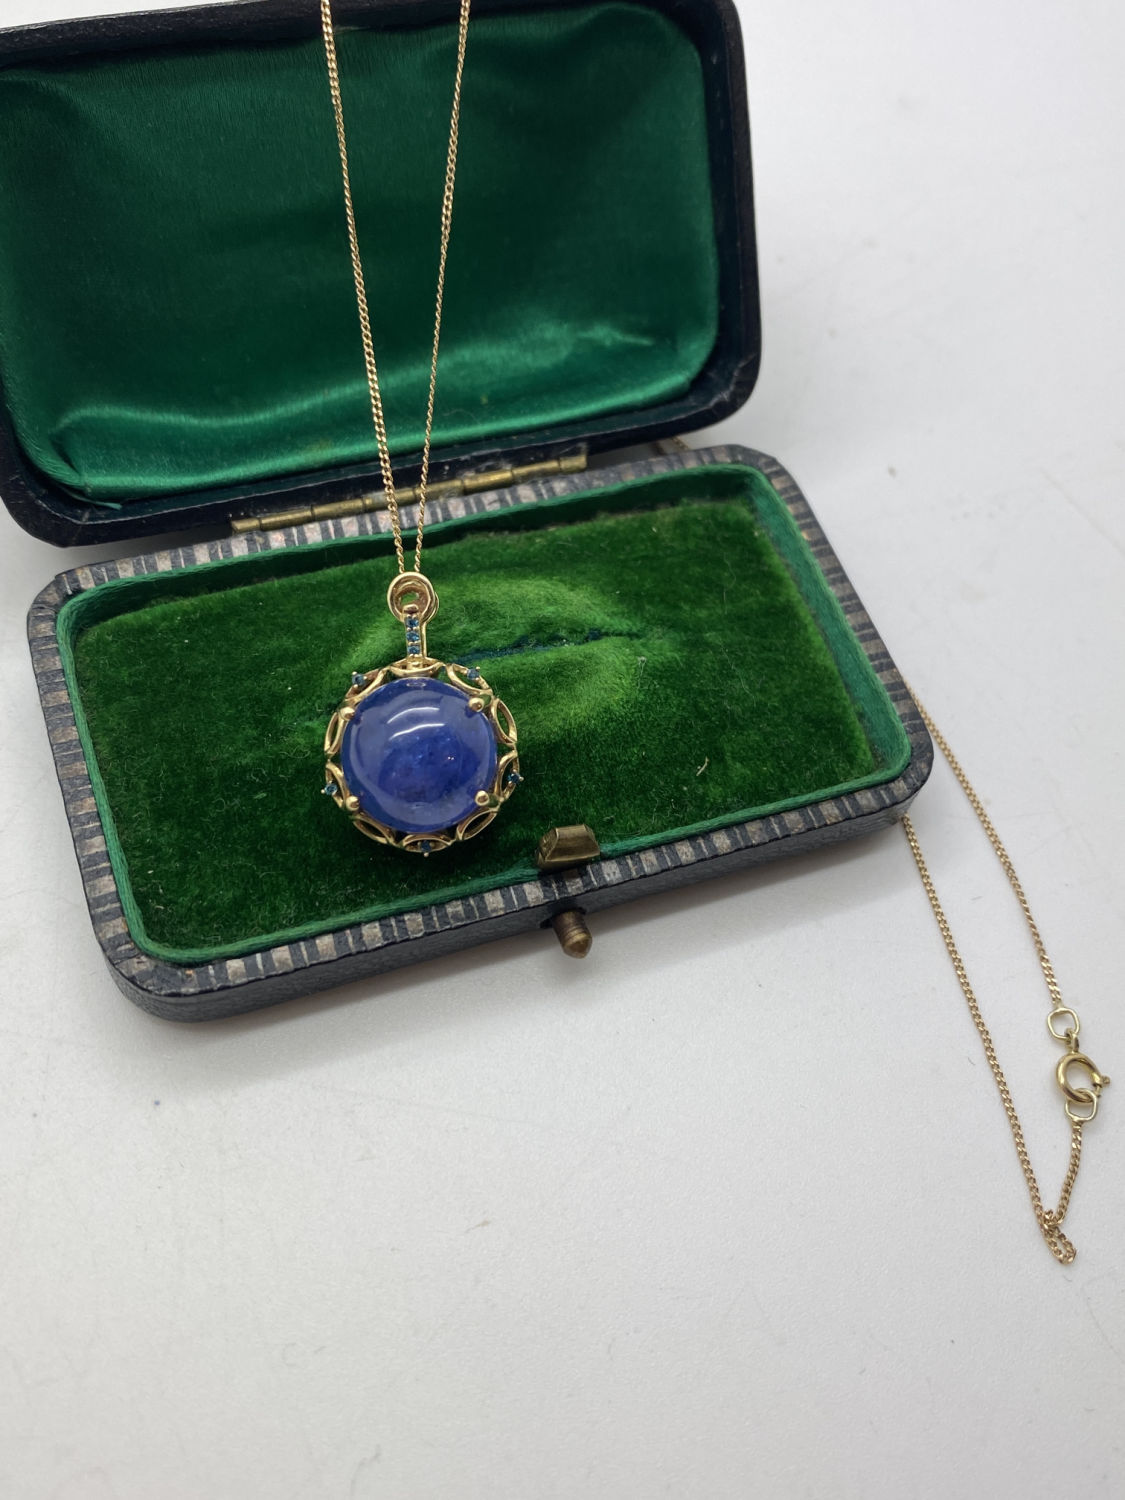 9ct GOLD STUNNING TANZANITE APPROX. 7.00ct AND BLUE DIAMOND PENDANT WITH CHAIN APPROX. LENGTH 16' - Image 3 of 3